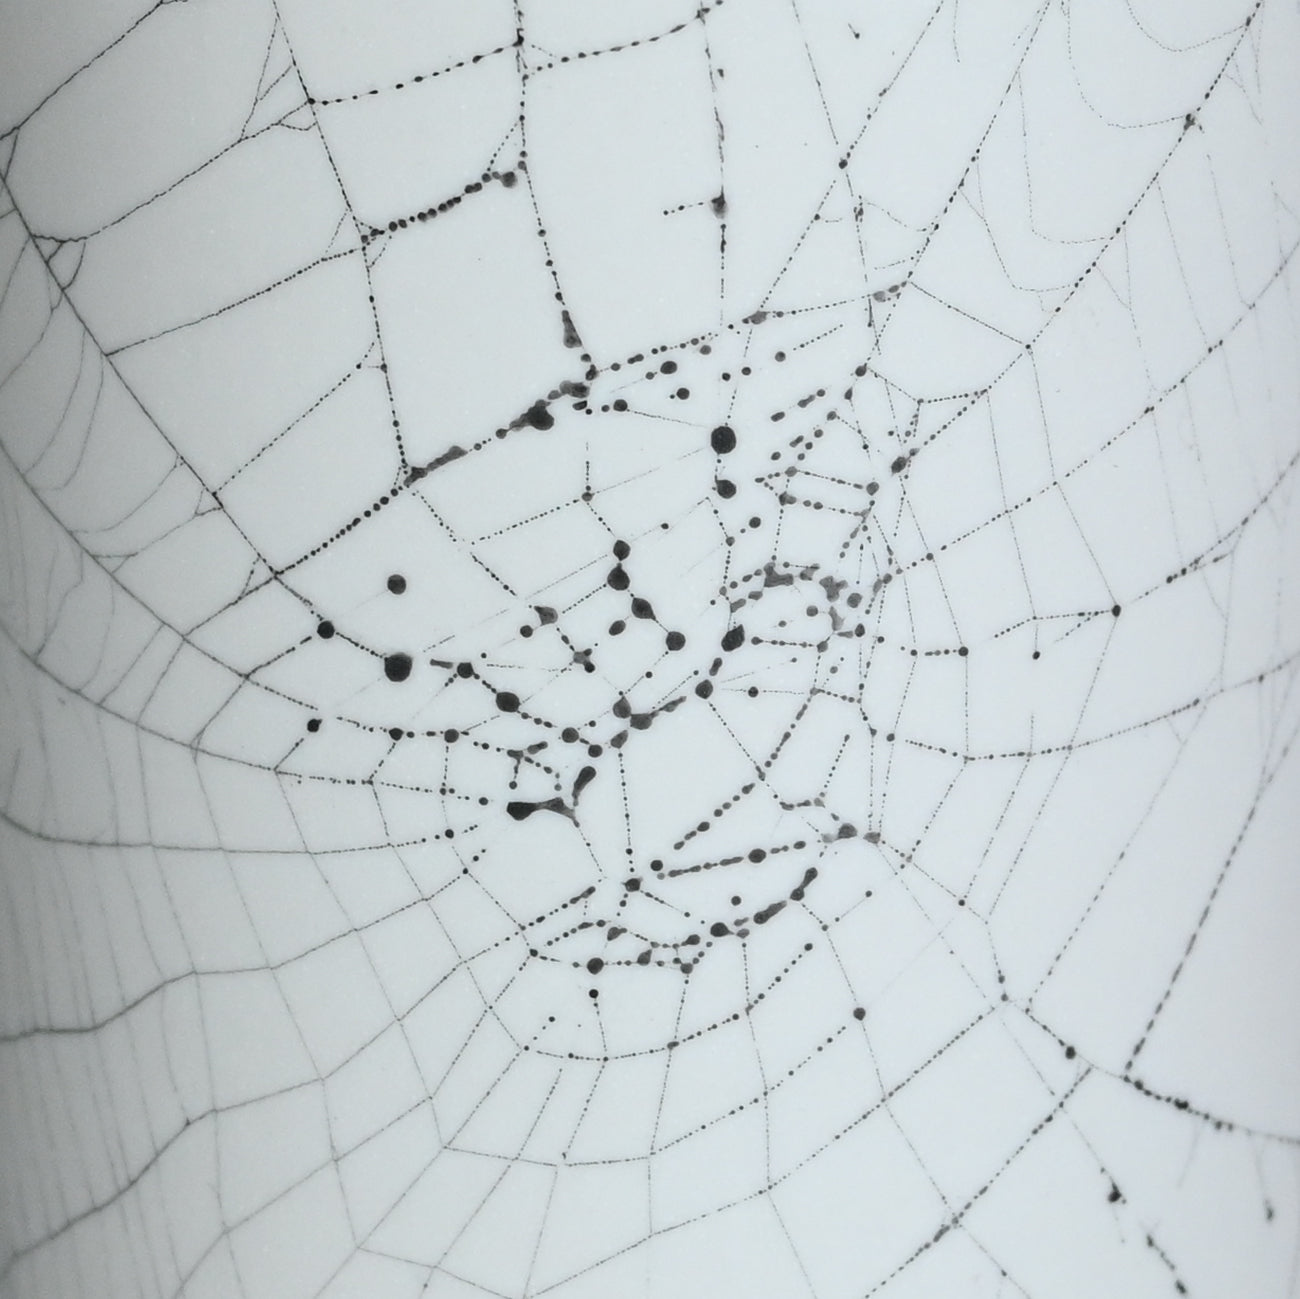 Web on Clay (180), Collected September 11, 2022